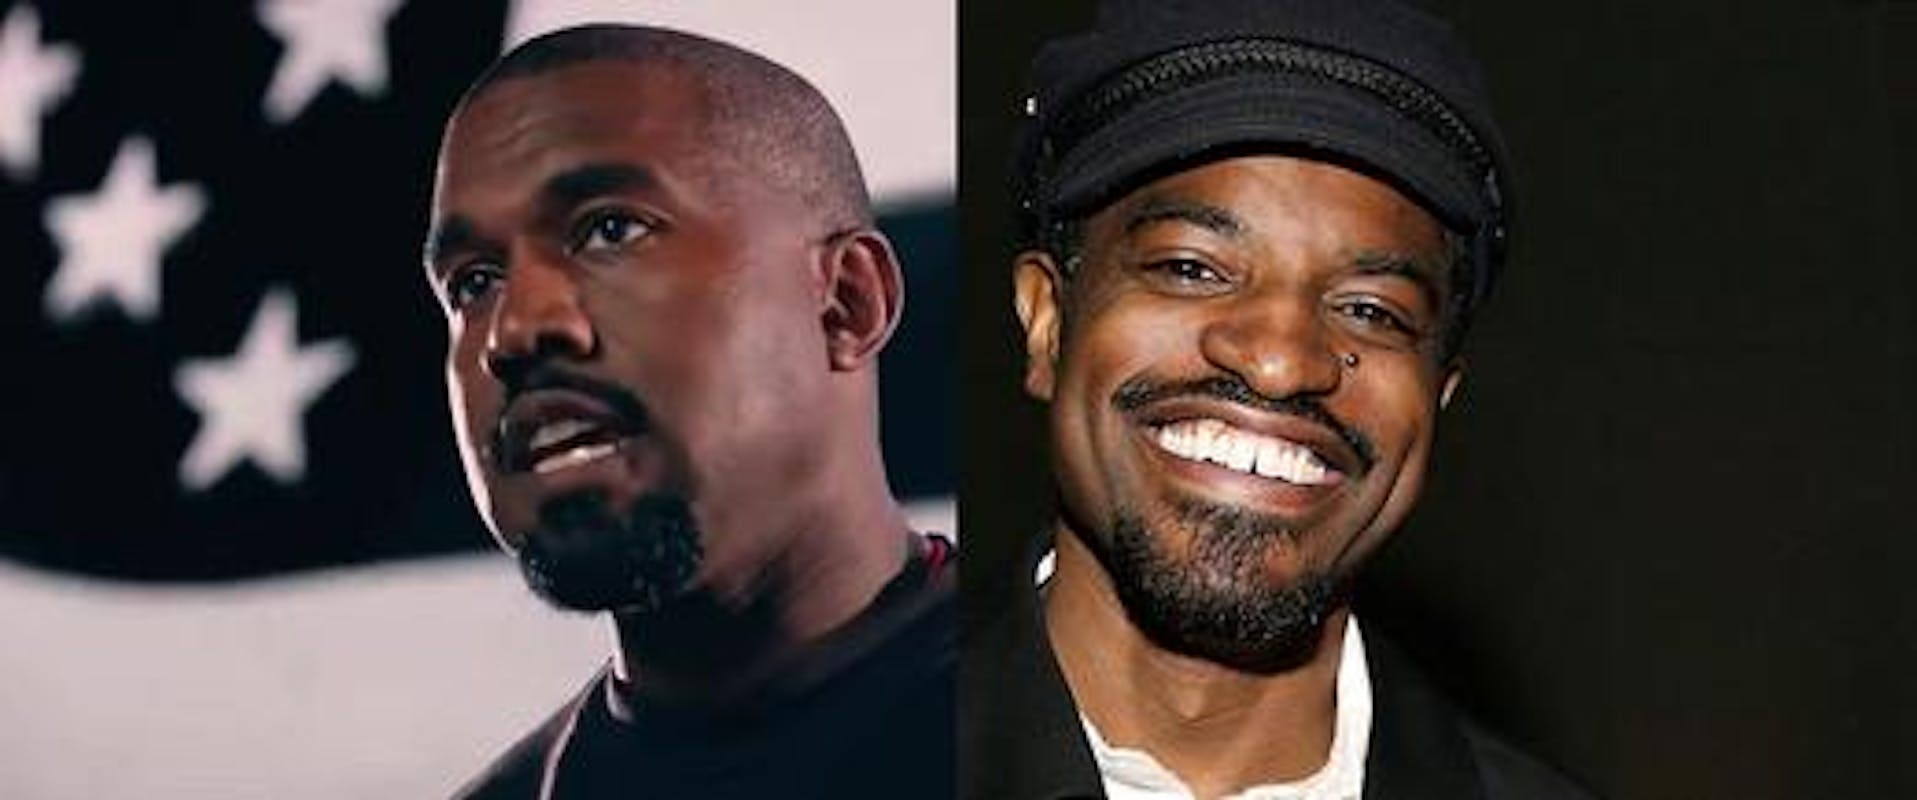 Kayne West and Andre 3000